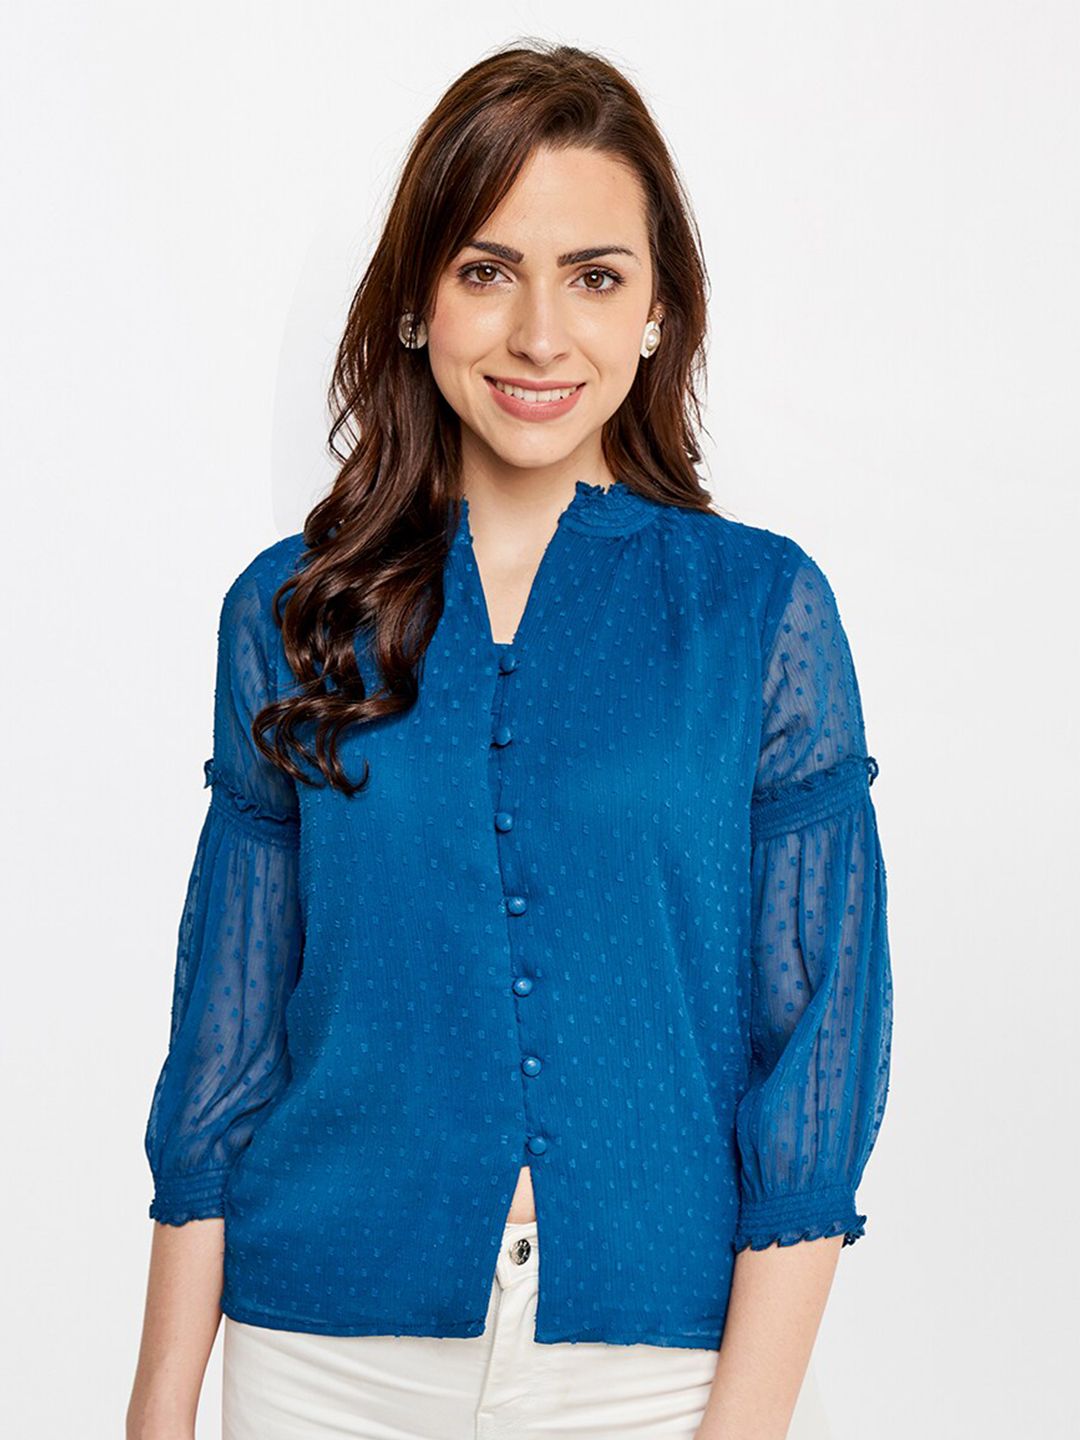 AND Teal Mandarin Collar Shirt Style Top Price in India